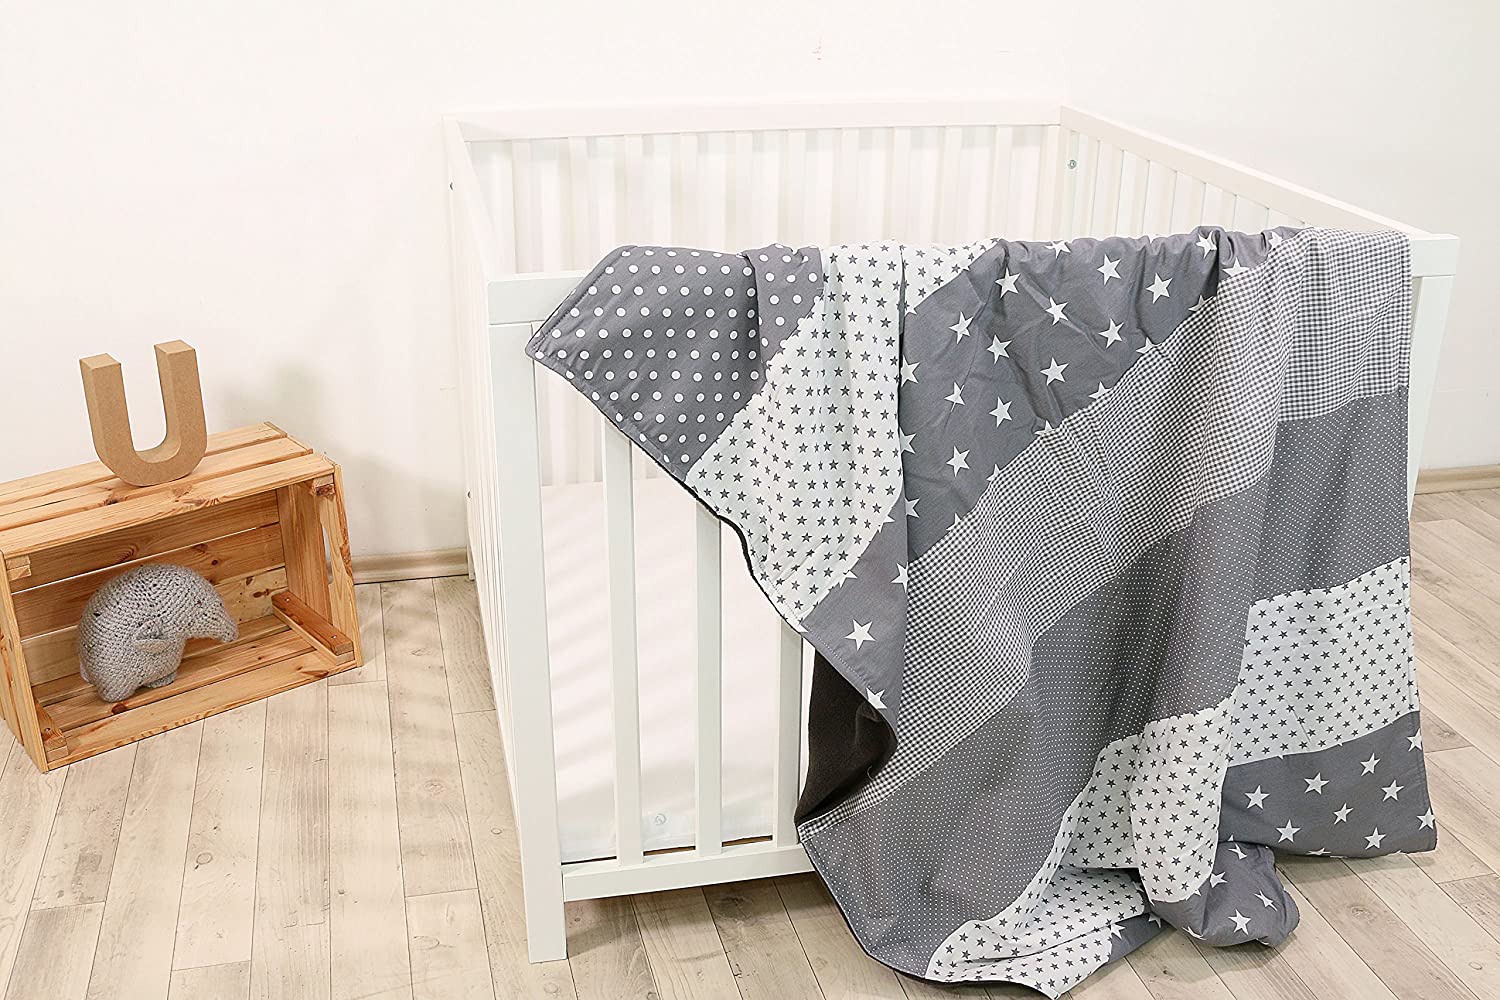 ULLENBOOM® Baby Blanket made of ÖkoTex Cotton and Fleece, Ideal as a Pram Blanket or Play Blanket, 70 x 100 cm & 100 x 140 cm and Made in the EU, Design: Stars, Dots, Patchwork 70 x 100 cm grey stars